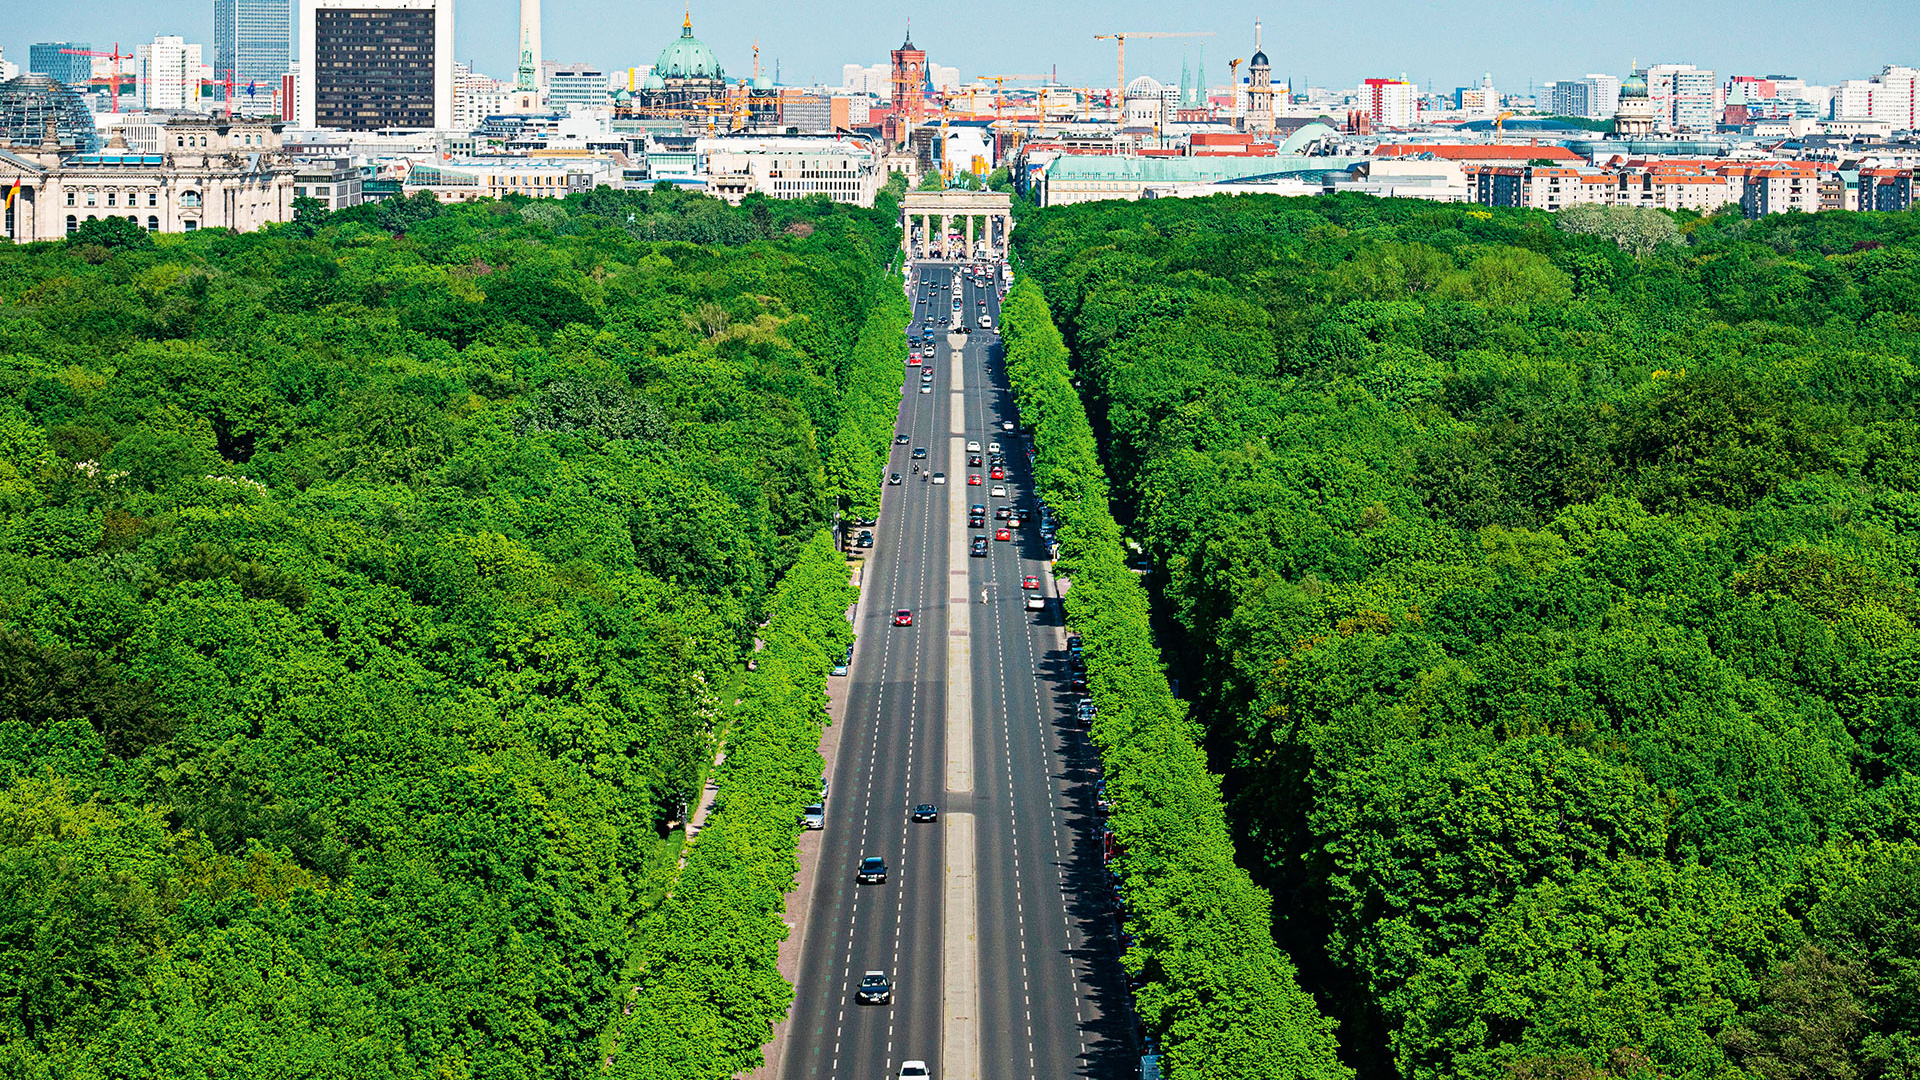 View of the Brandenburg Gate and cityscape from near the Tiergarten